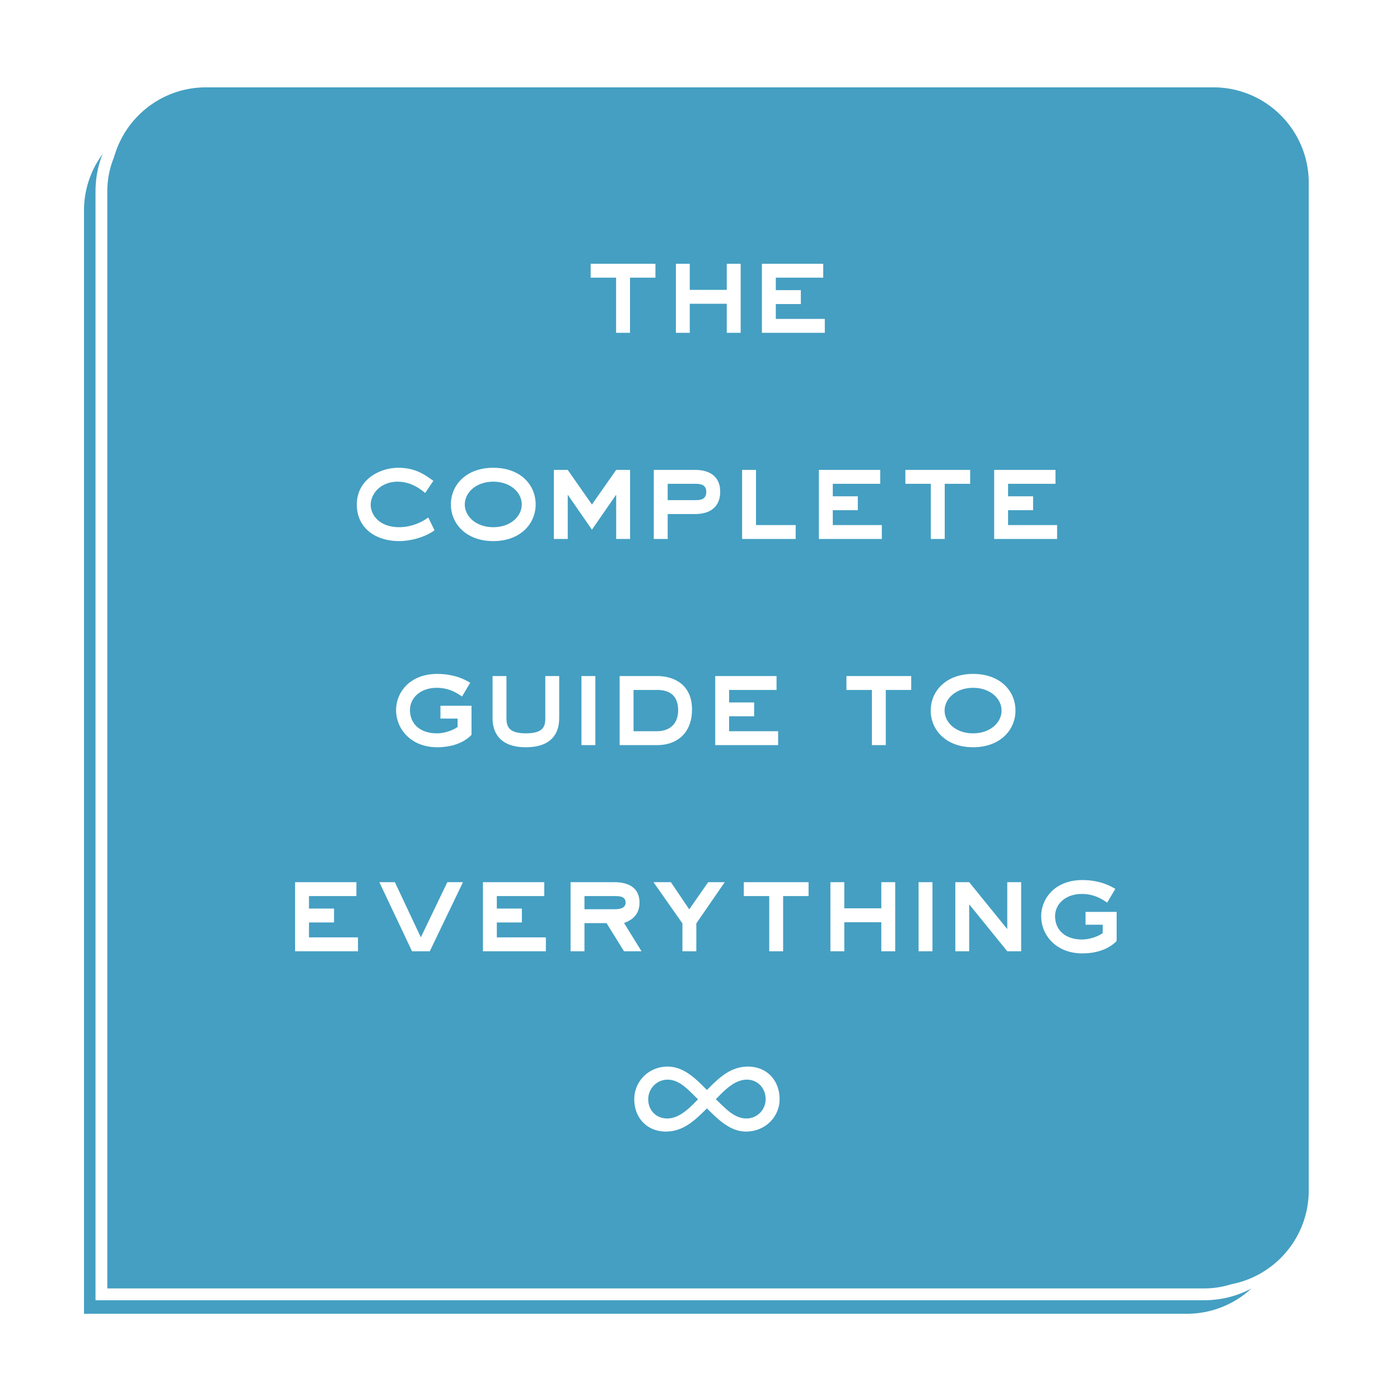 The Complete Guide to Everything